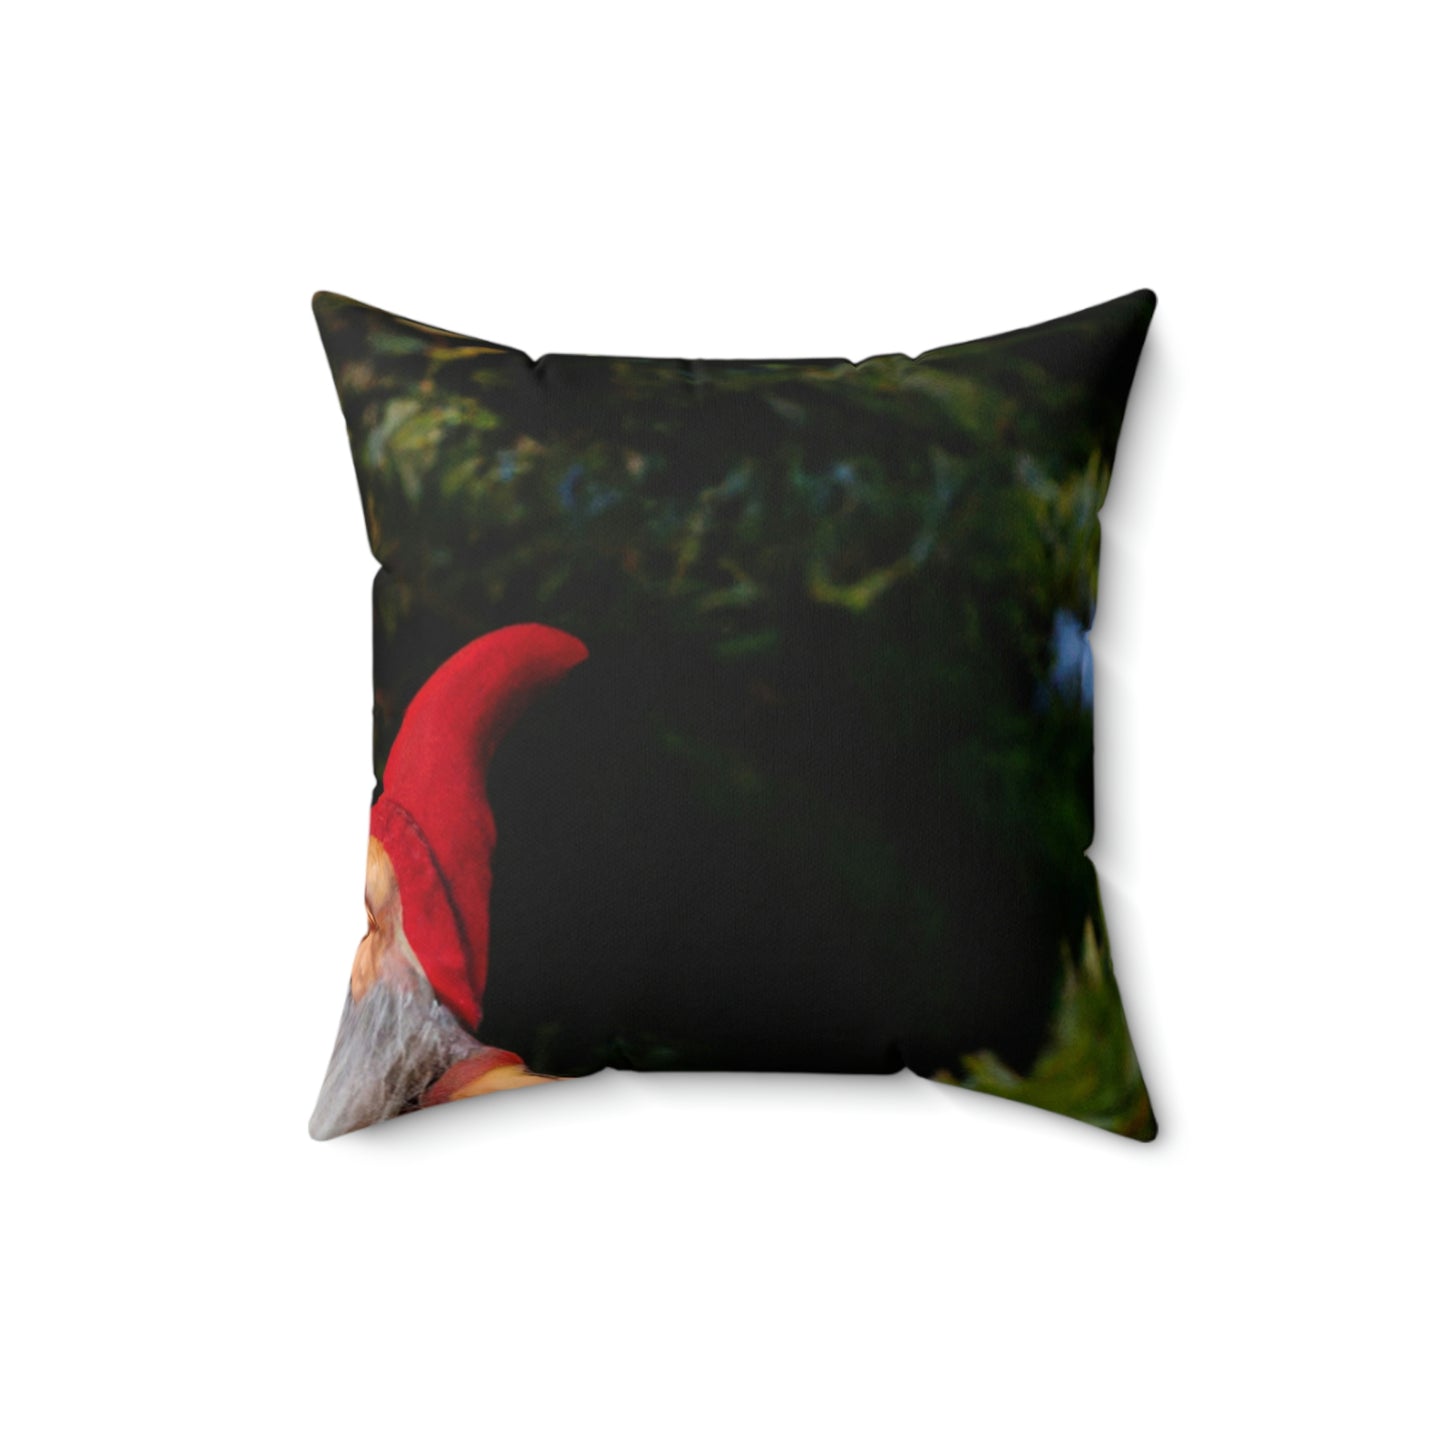 The Gnome's High-Rise Adventure - The Alien Square Pillow